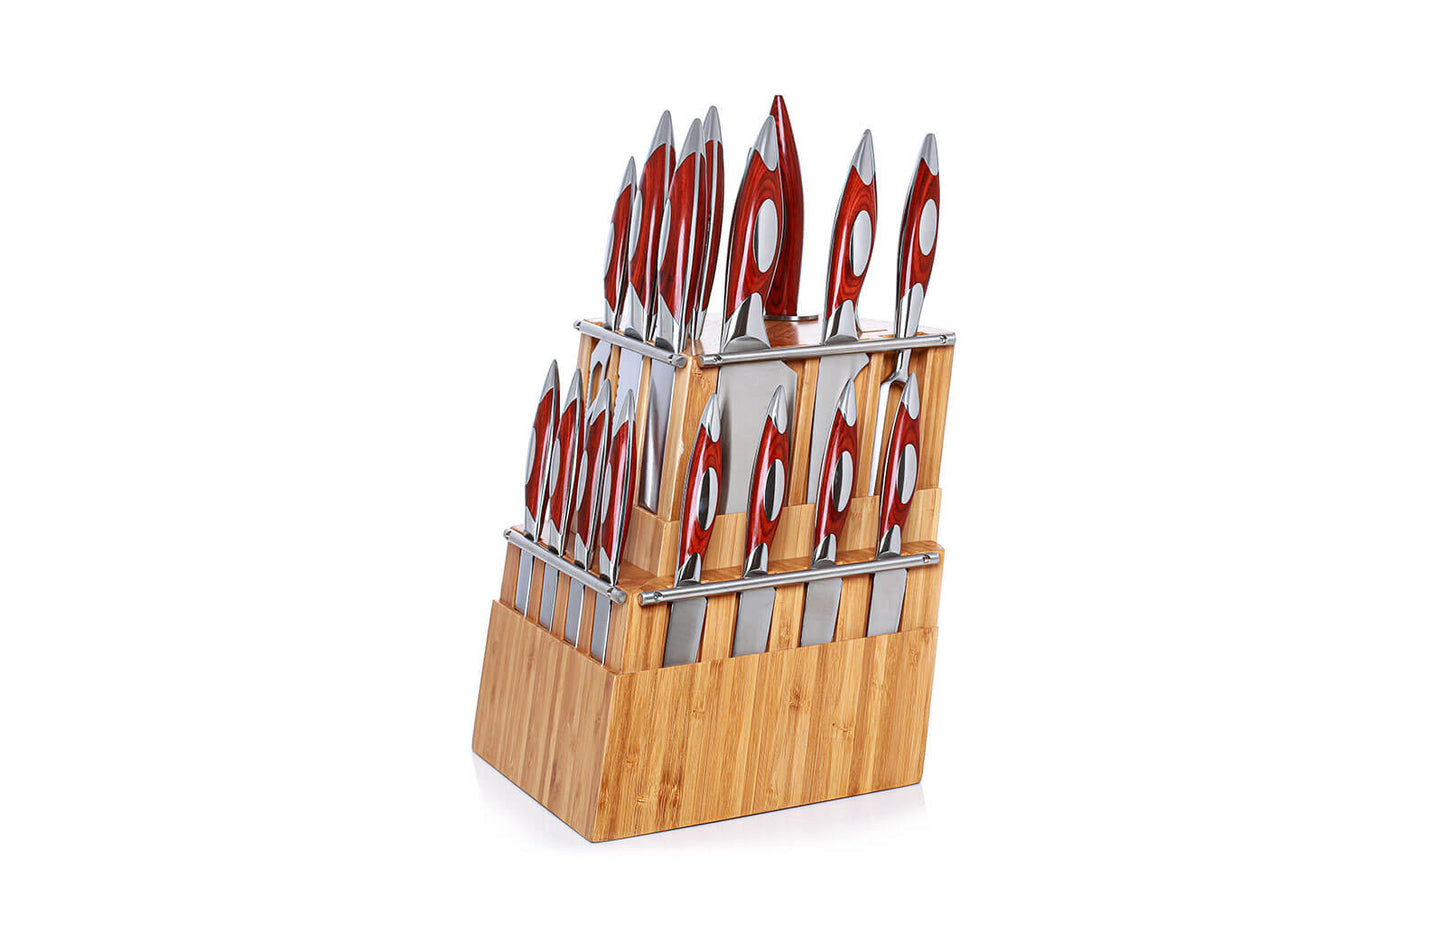 20pc Classic Collection In Rubber Wood Block